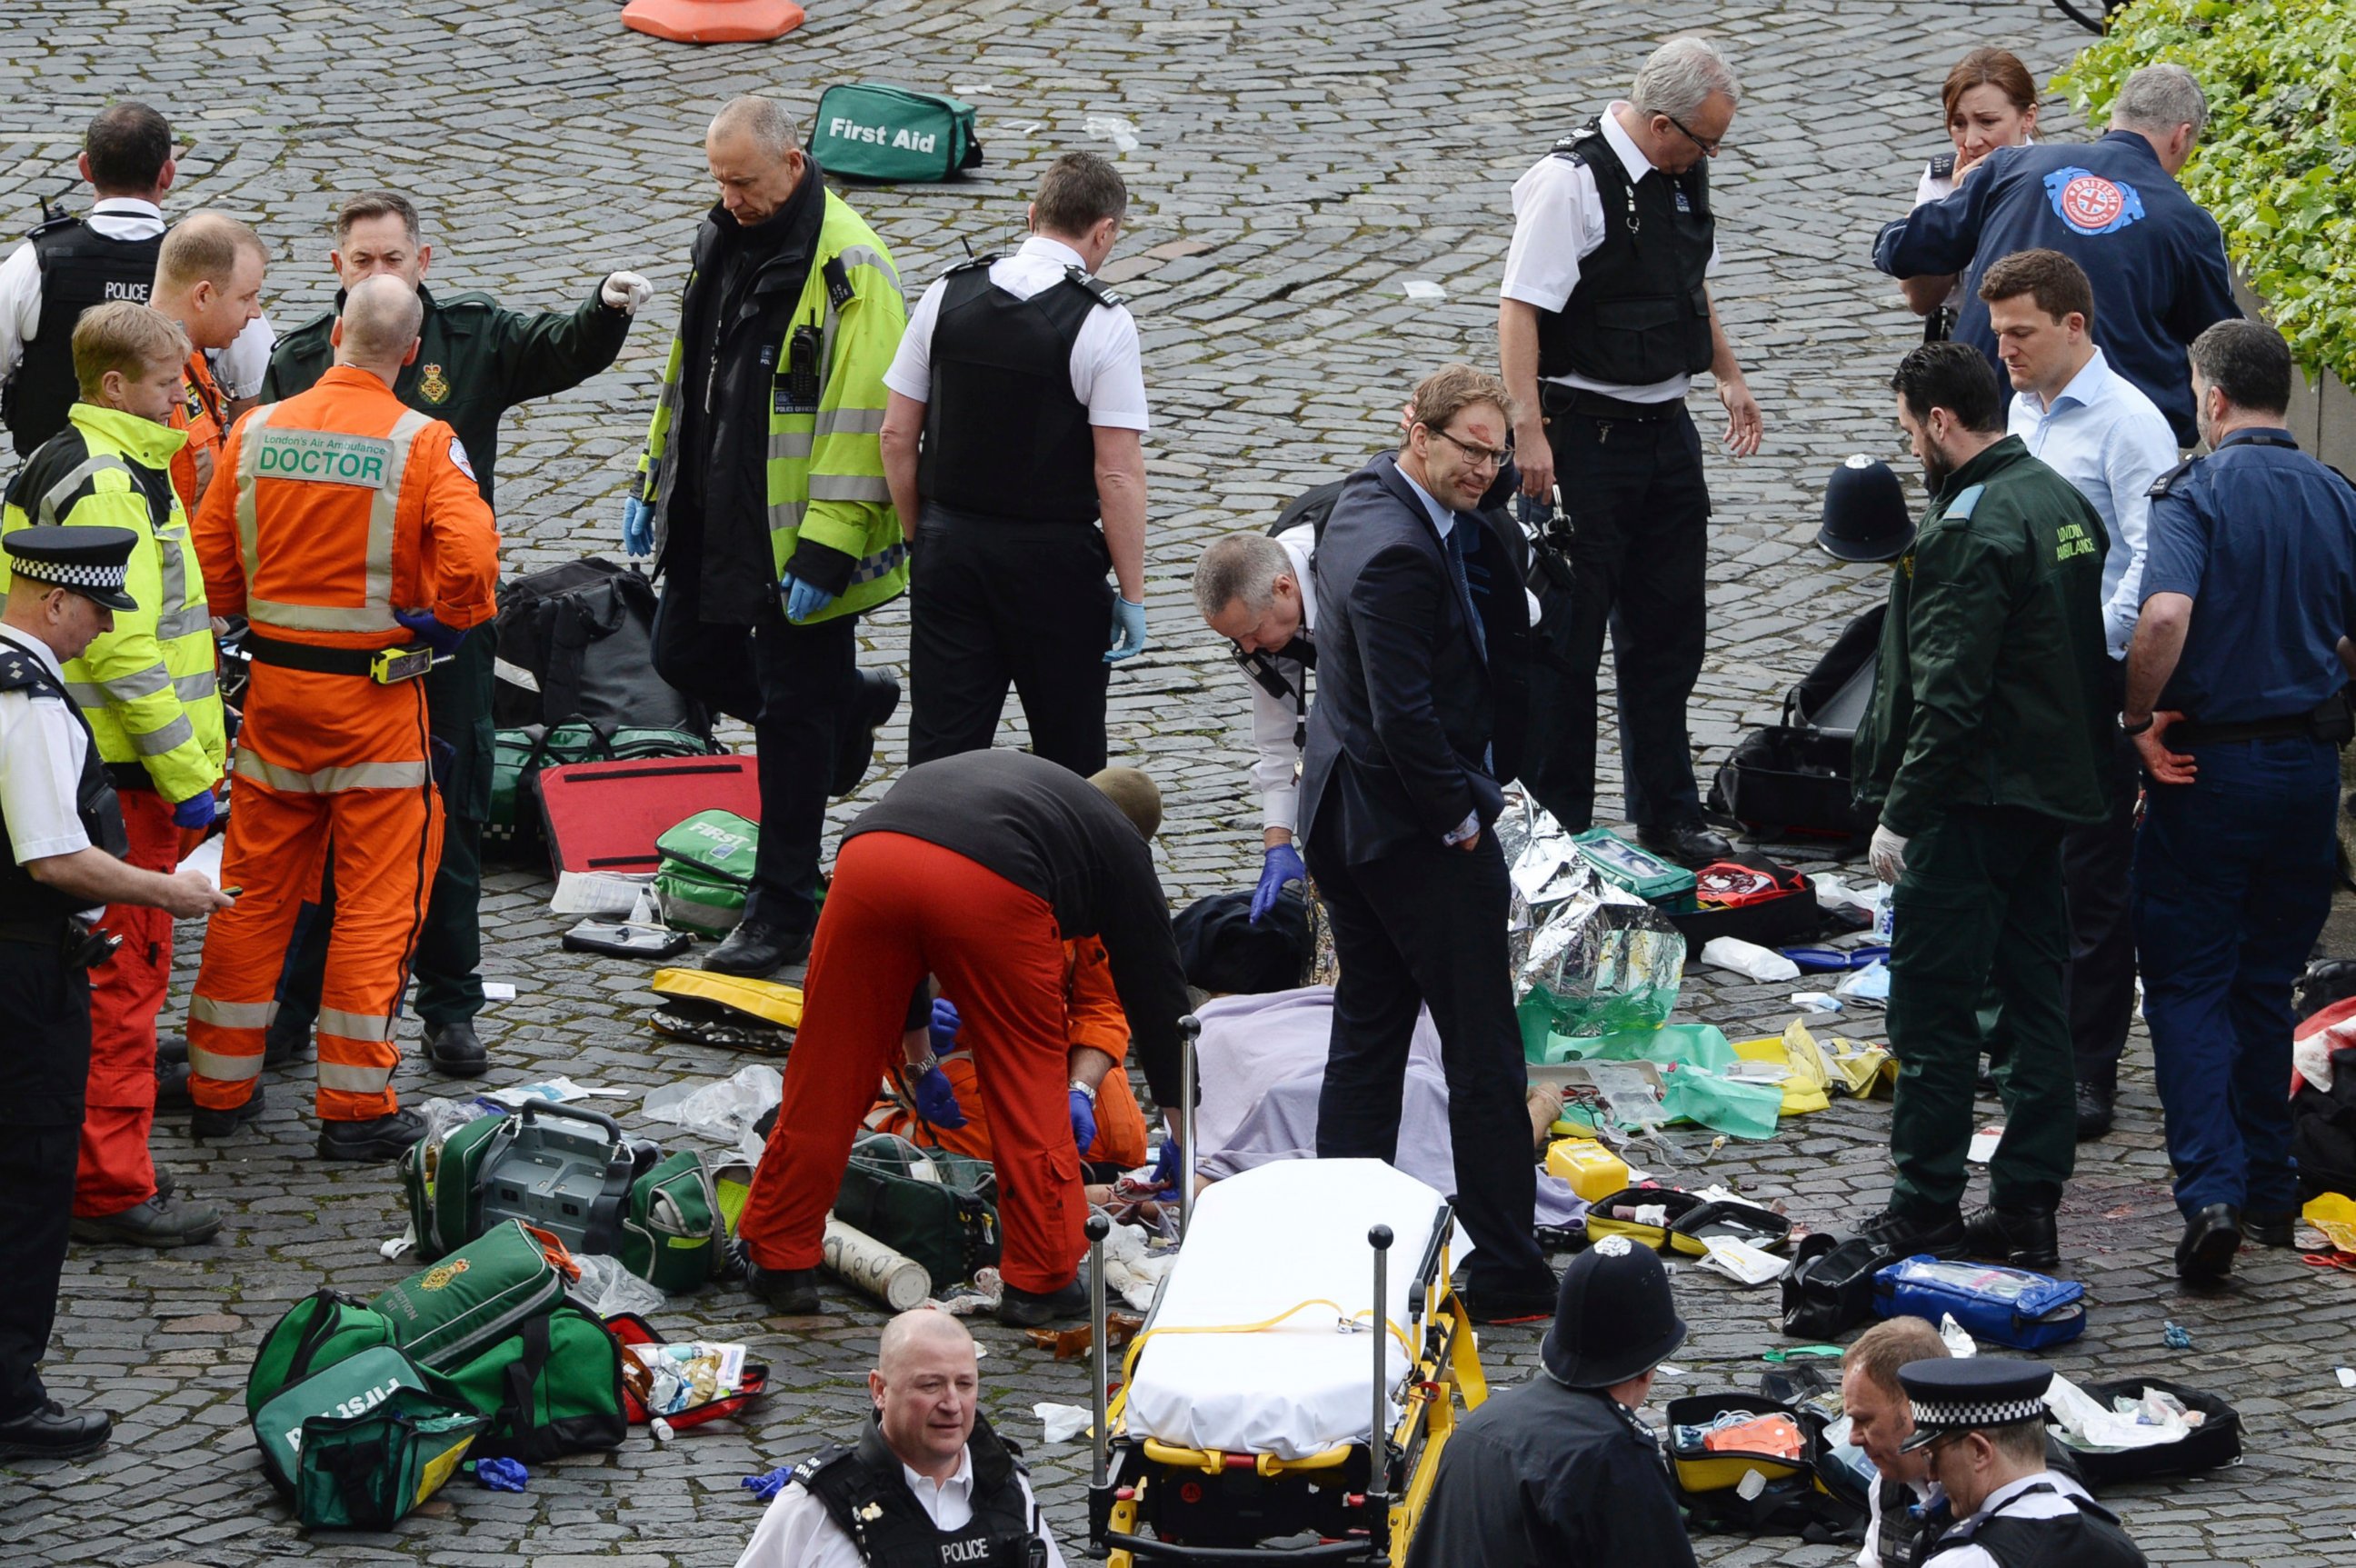 PHOTO: Conservative MP Tobias Ellwood stands among the emergency services at the scene outside the Palace of Westminster, London, March 22, 2017.